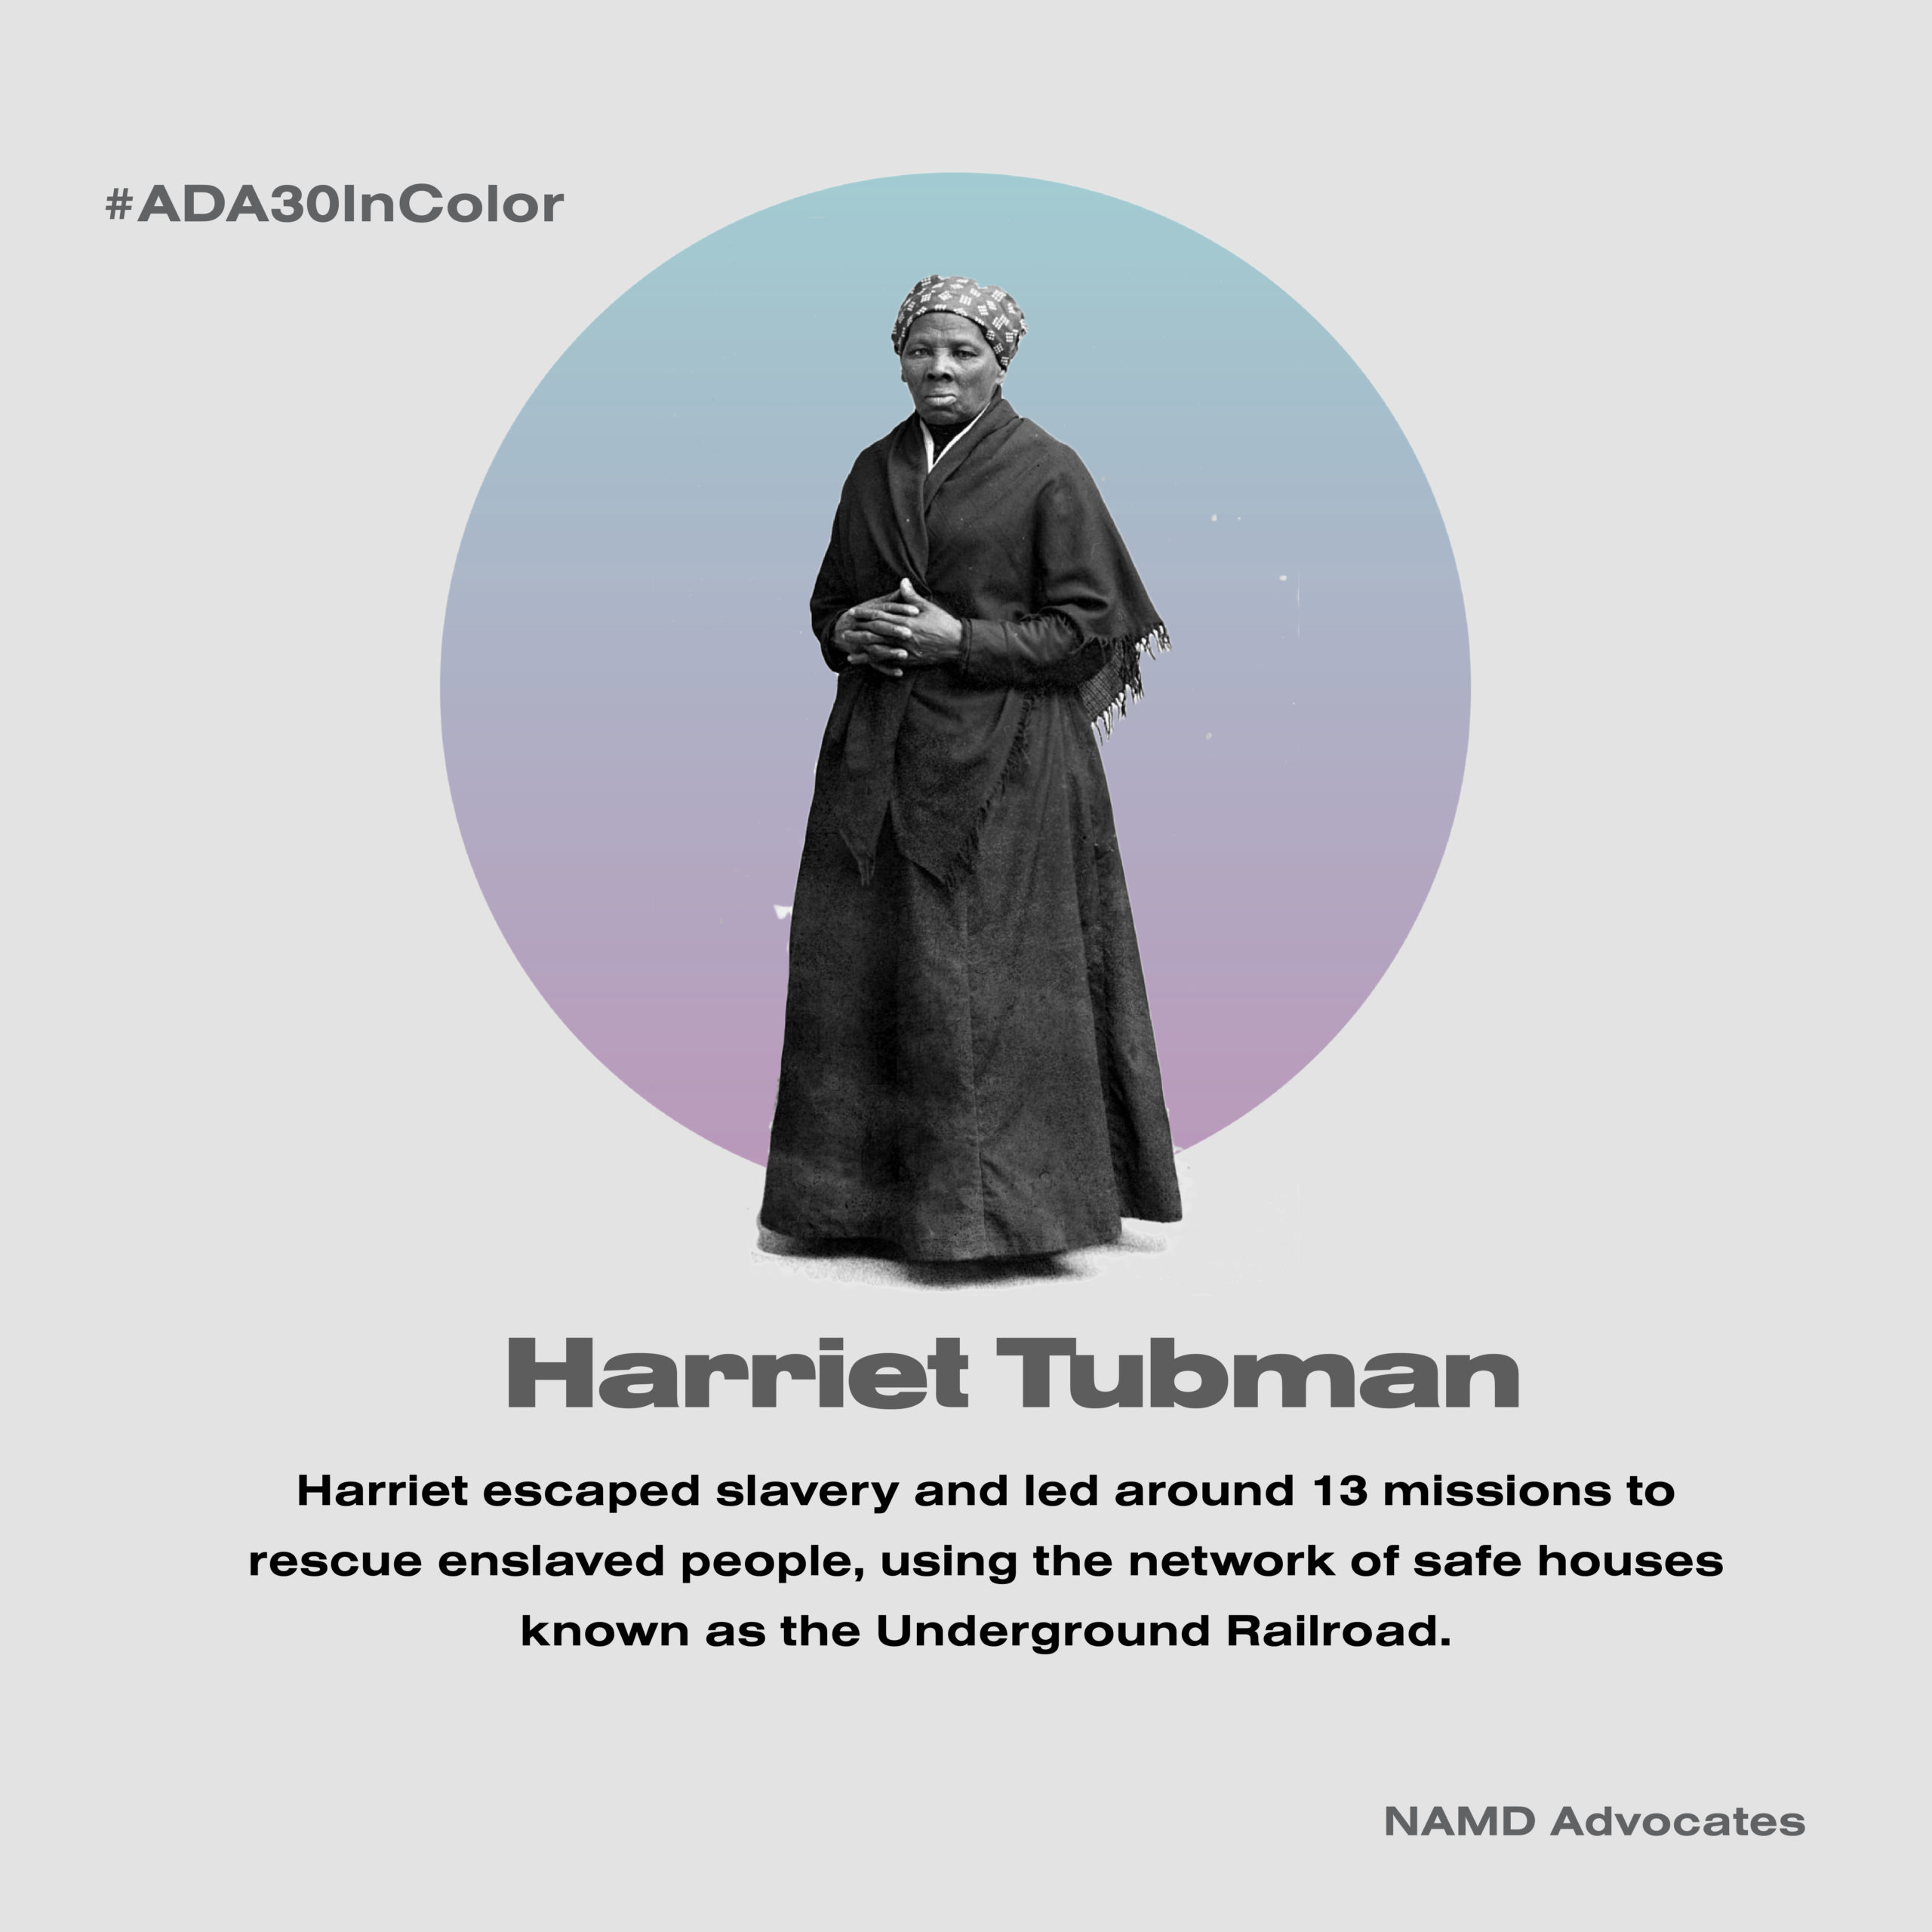 Harriet Tubman. Harriet escaped slavery and led around 13 missions to rescue enslaved people, using the network of safe houses known as the Underground Railroad.